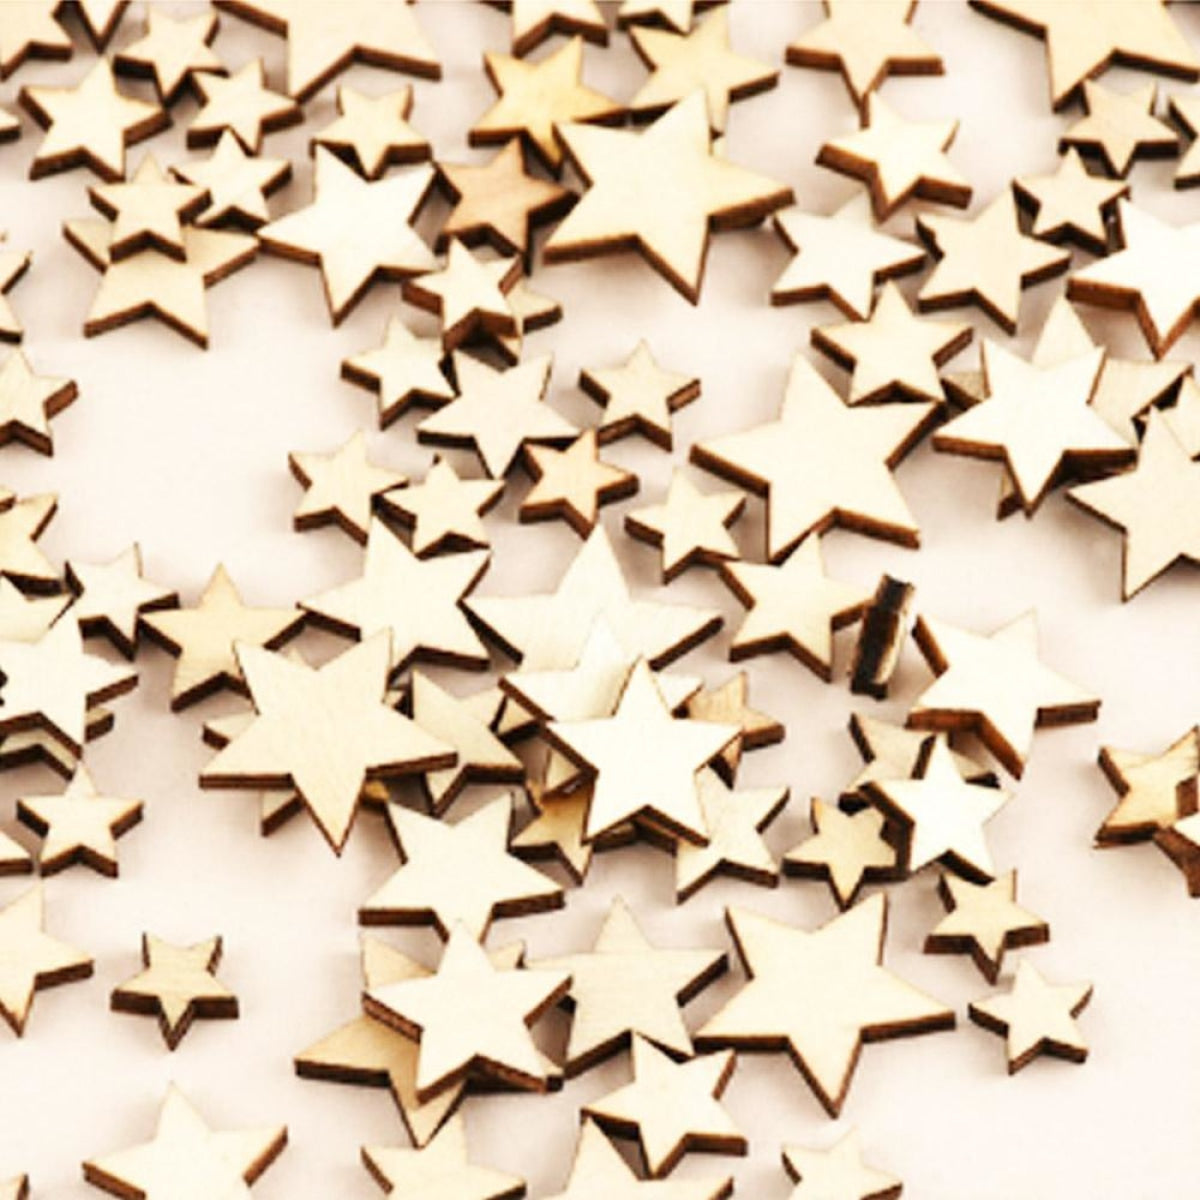 200pcs Wooden Stars Small Confetti 10mm-20mm Wood Crafts Decorations Table Scatter